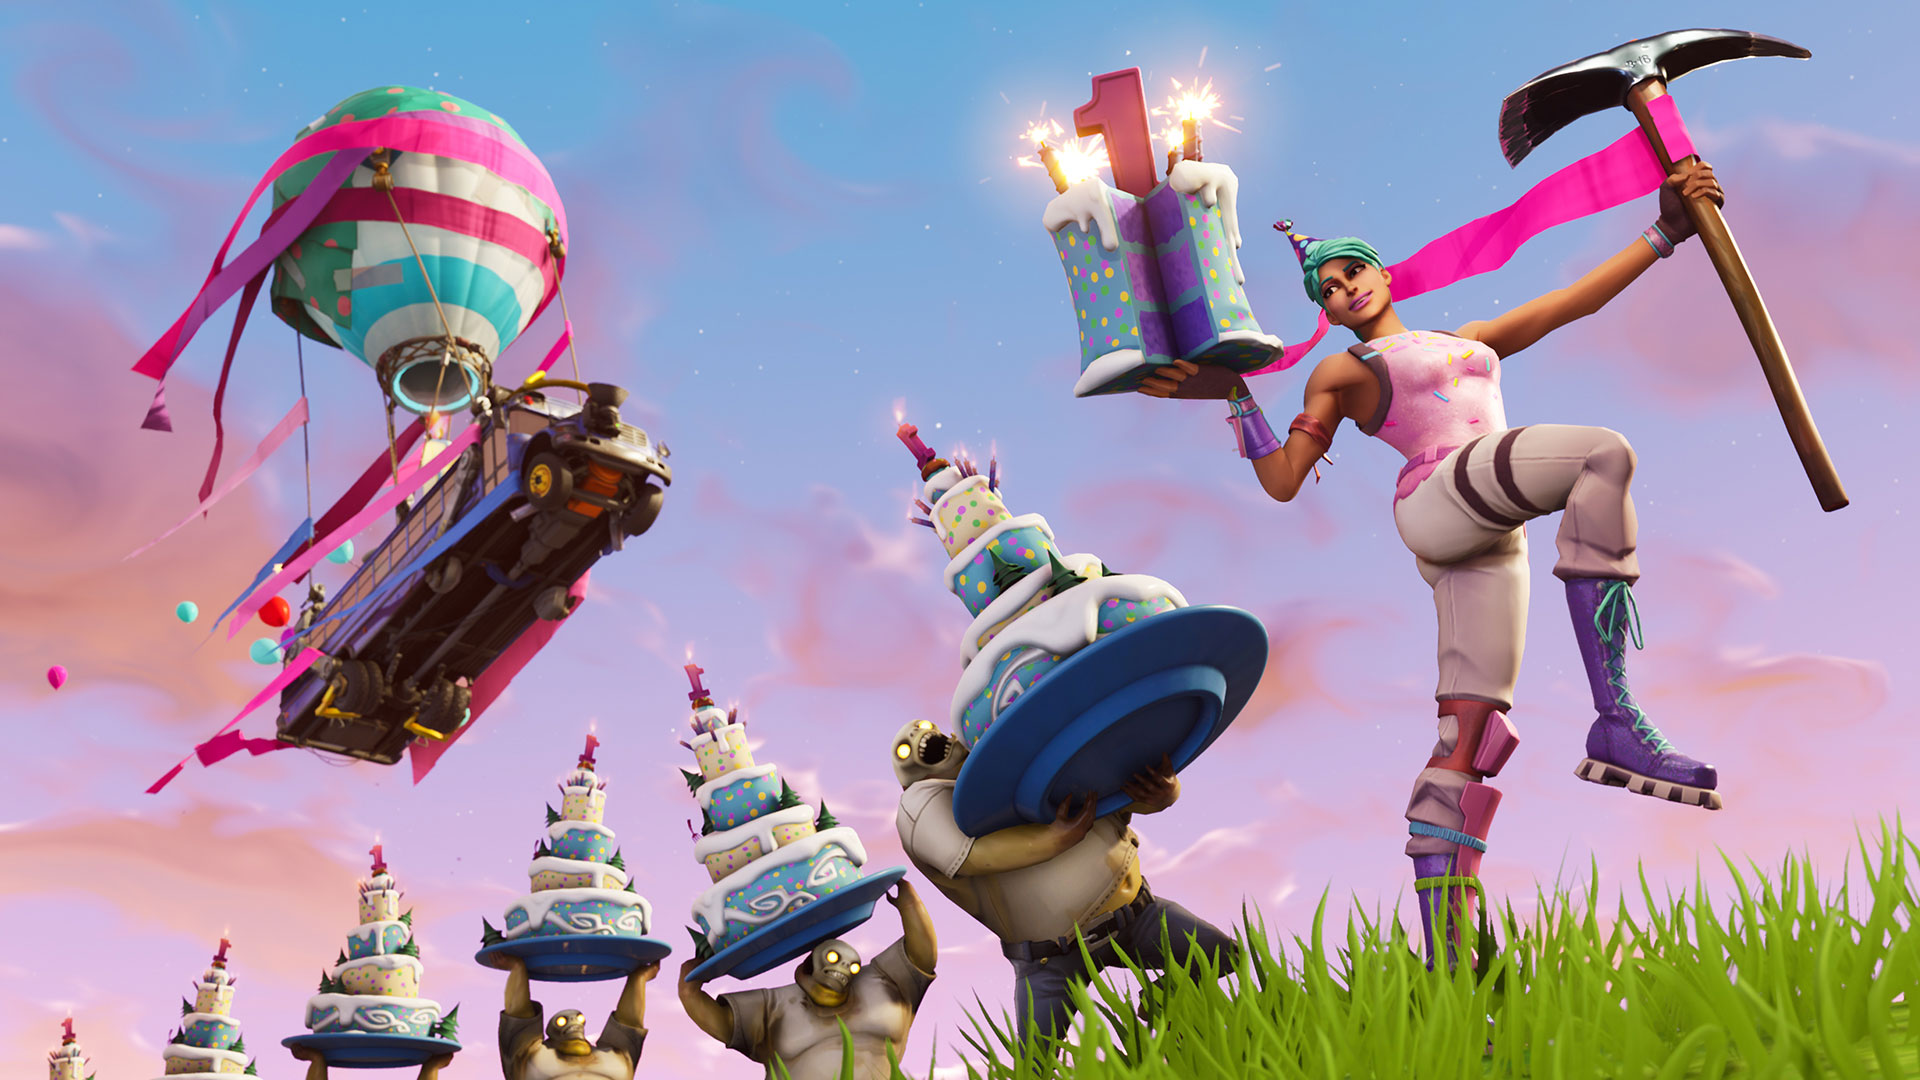 Birthday Cake locations in Fortnite: Where are the cakes?